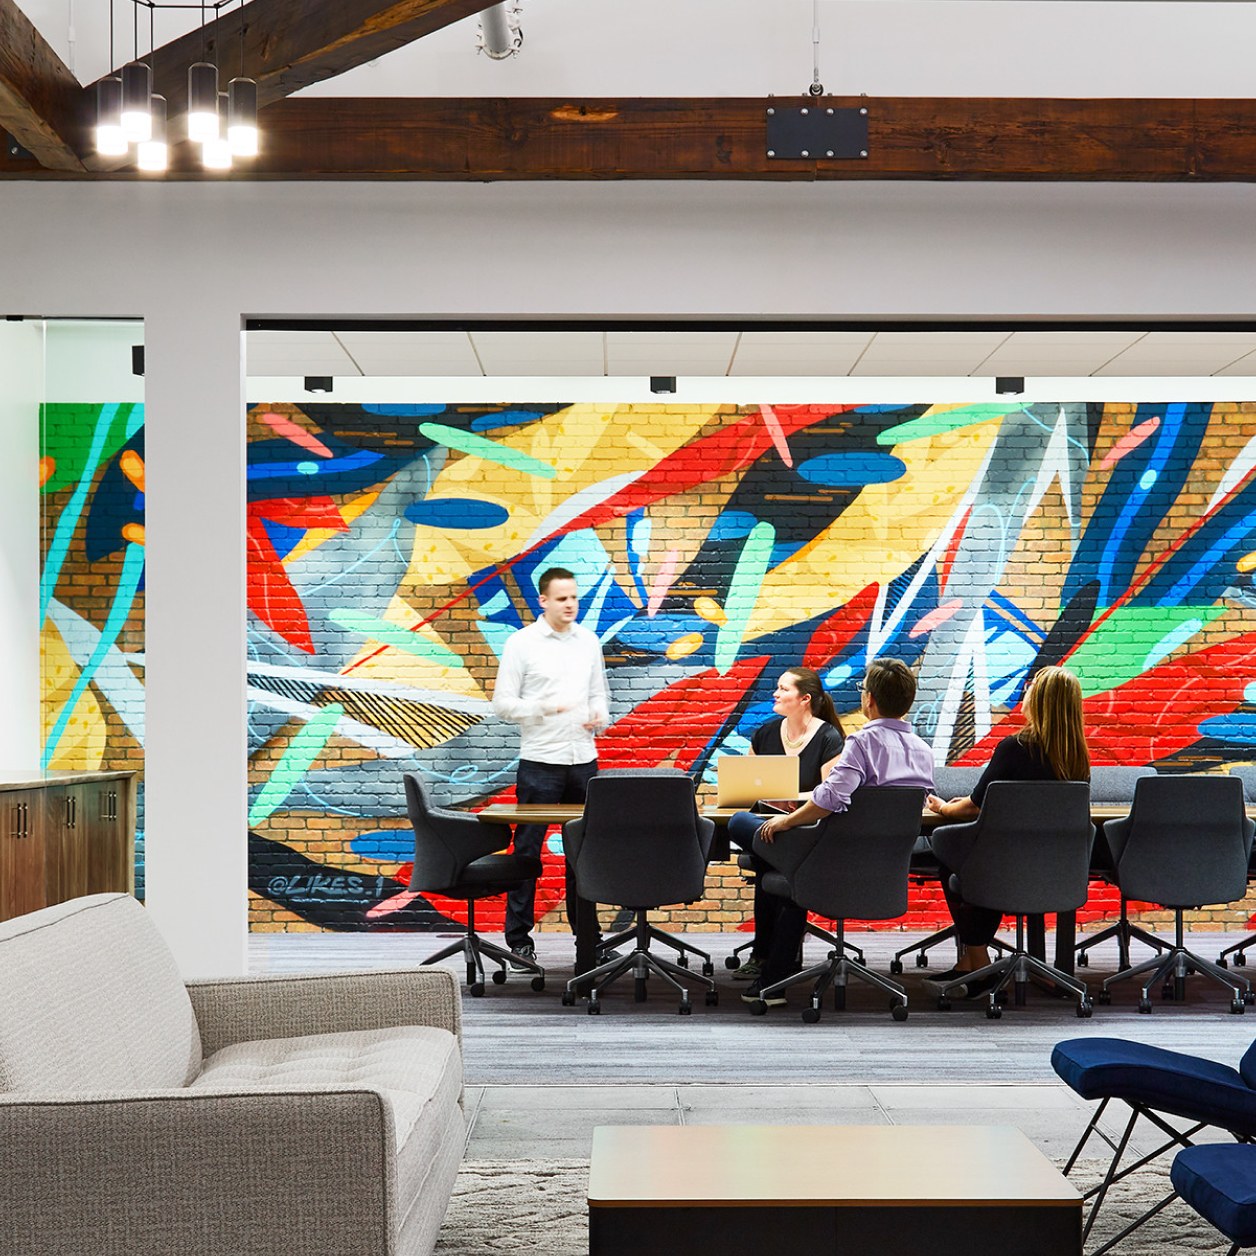 A group of people working at a desk with a colorful mural in the background.